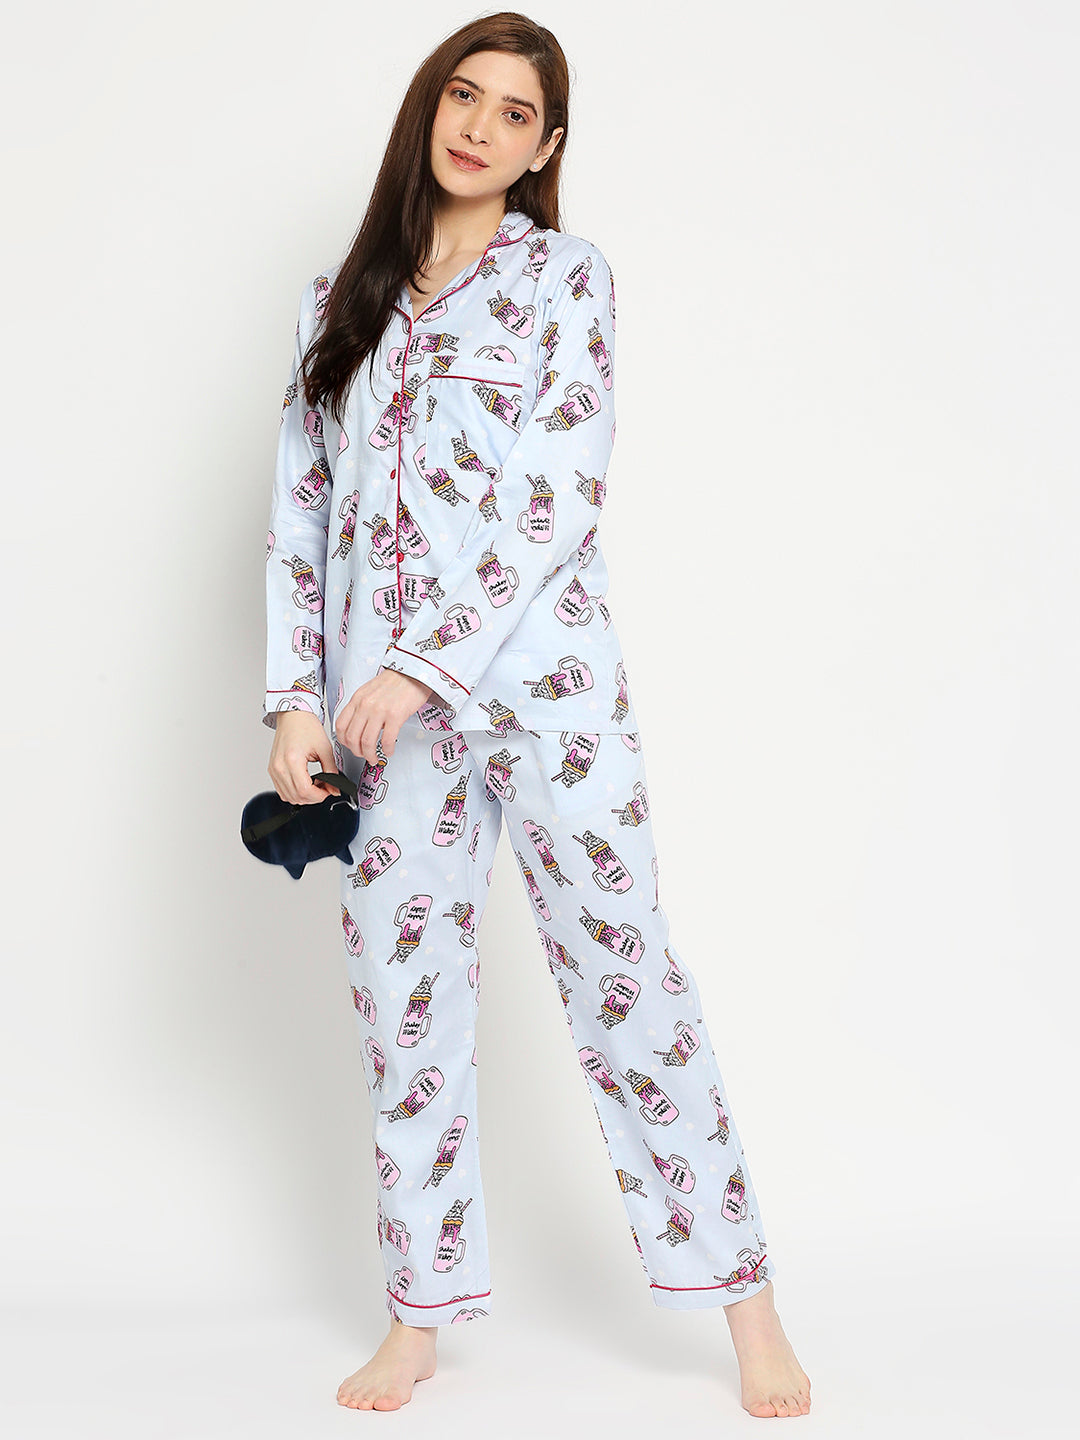 Shakey Wakey Button Down Pj Set - Pure Cotton Pj Set with Notched Collar